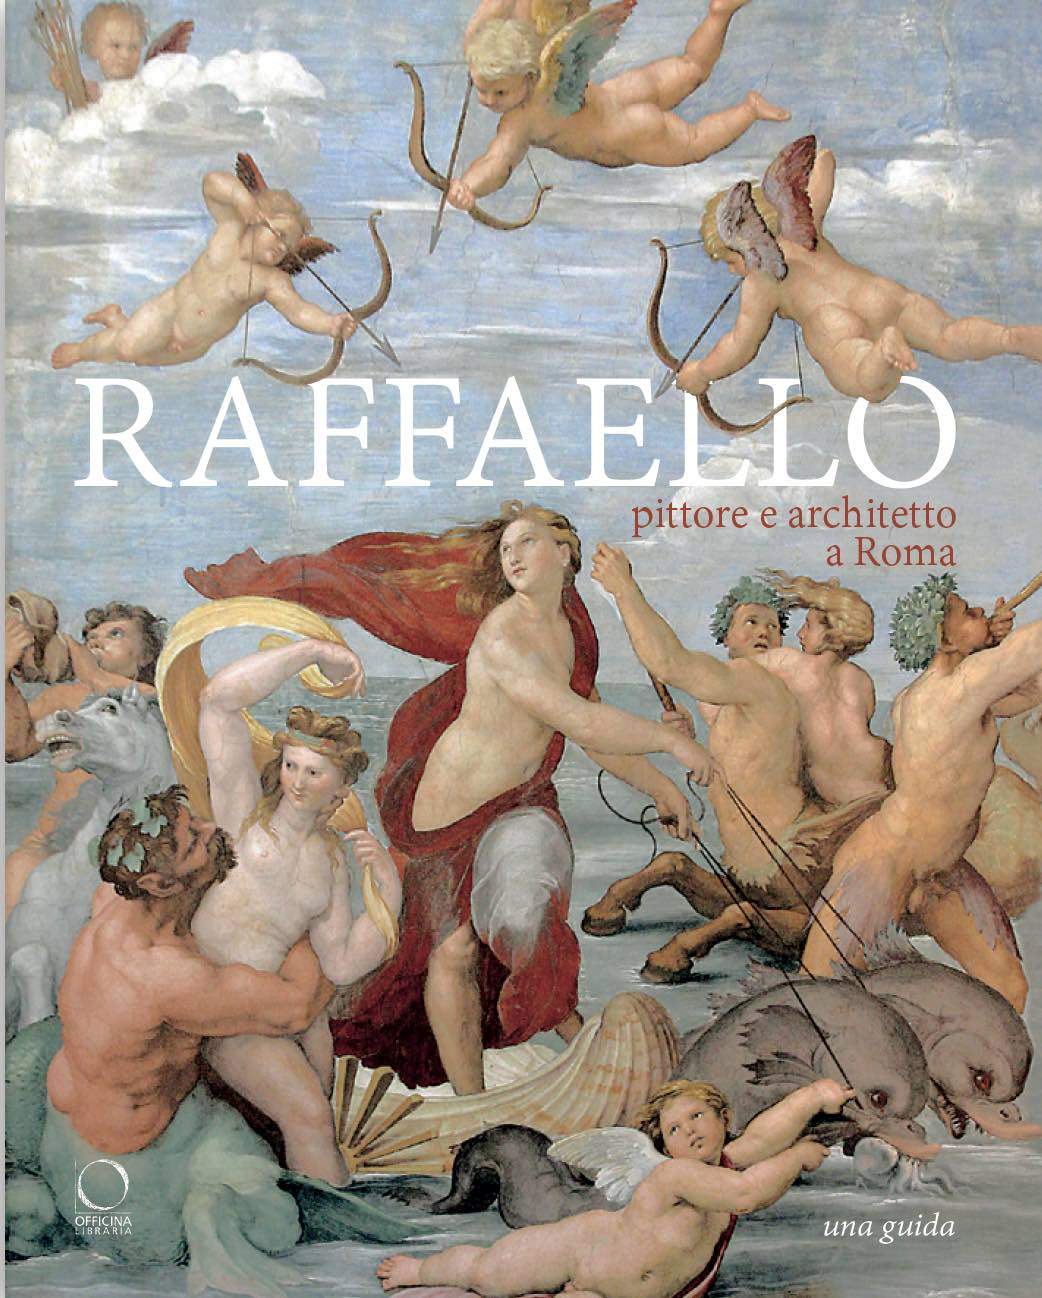 Book comes out with itineraries for discovering the Rome of Raphael painter and architect